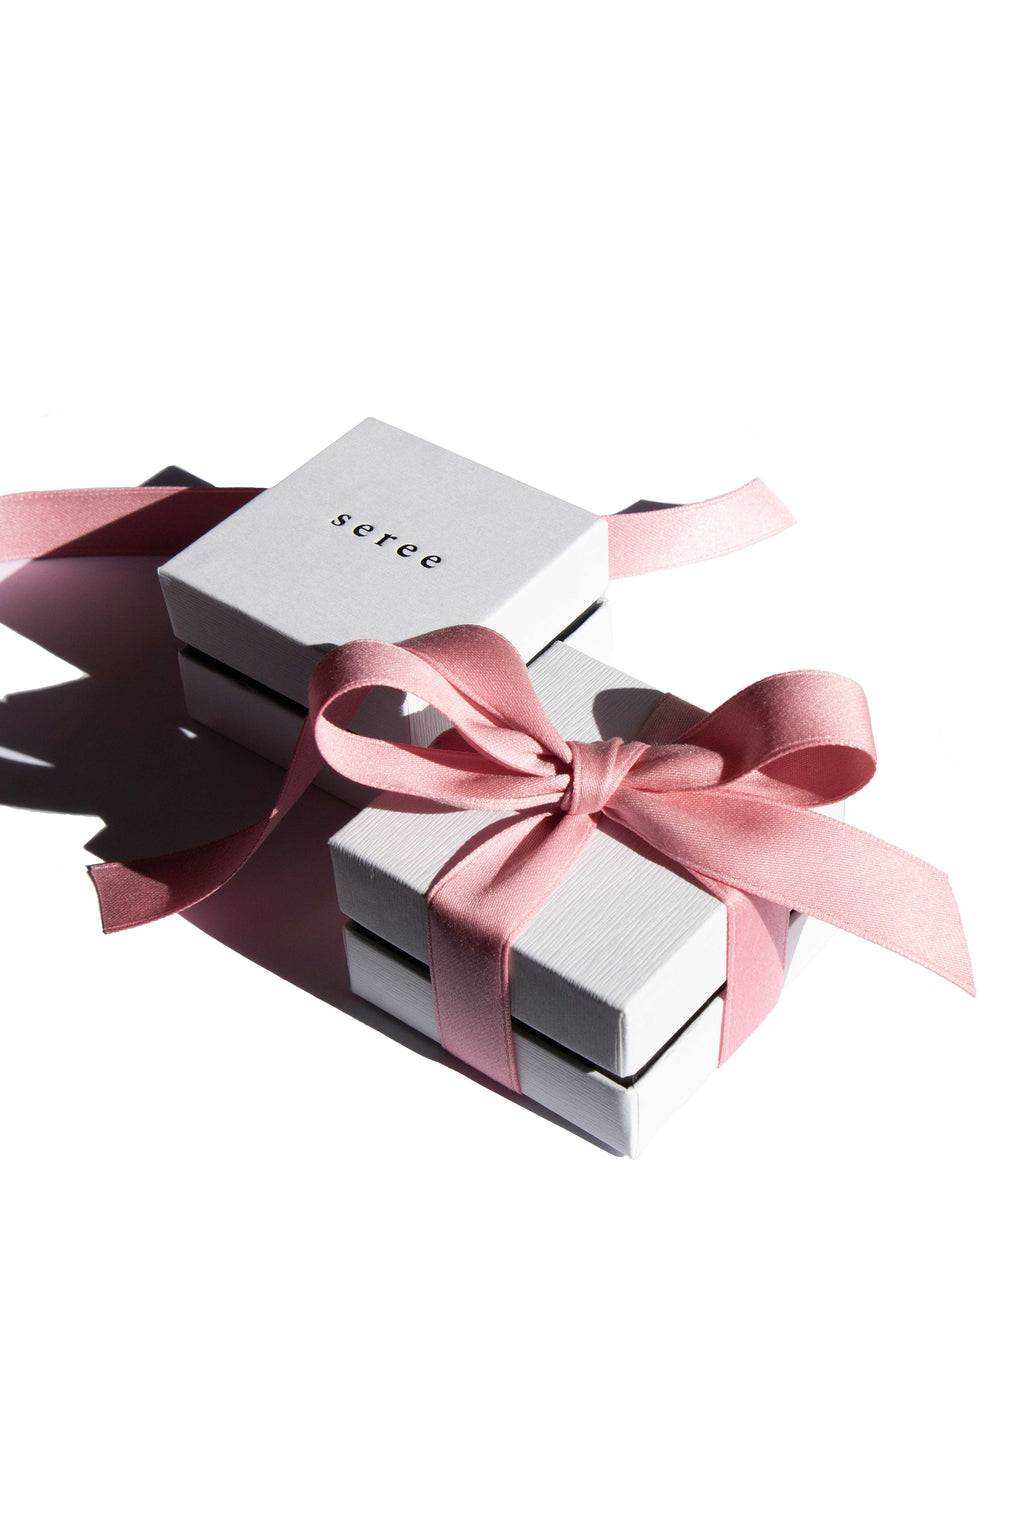 seree-gift-wrapping-with-pink-ribbon